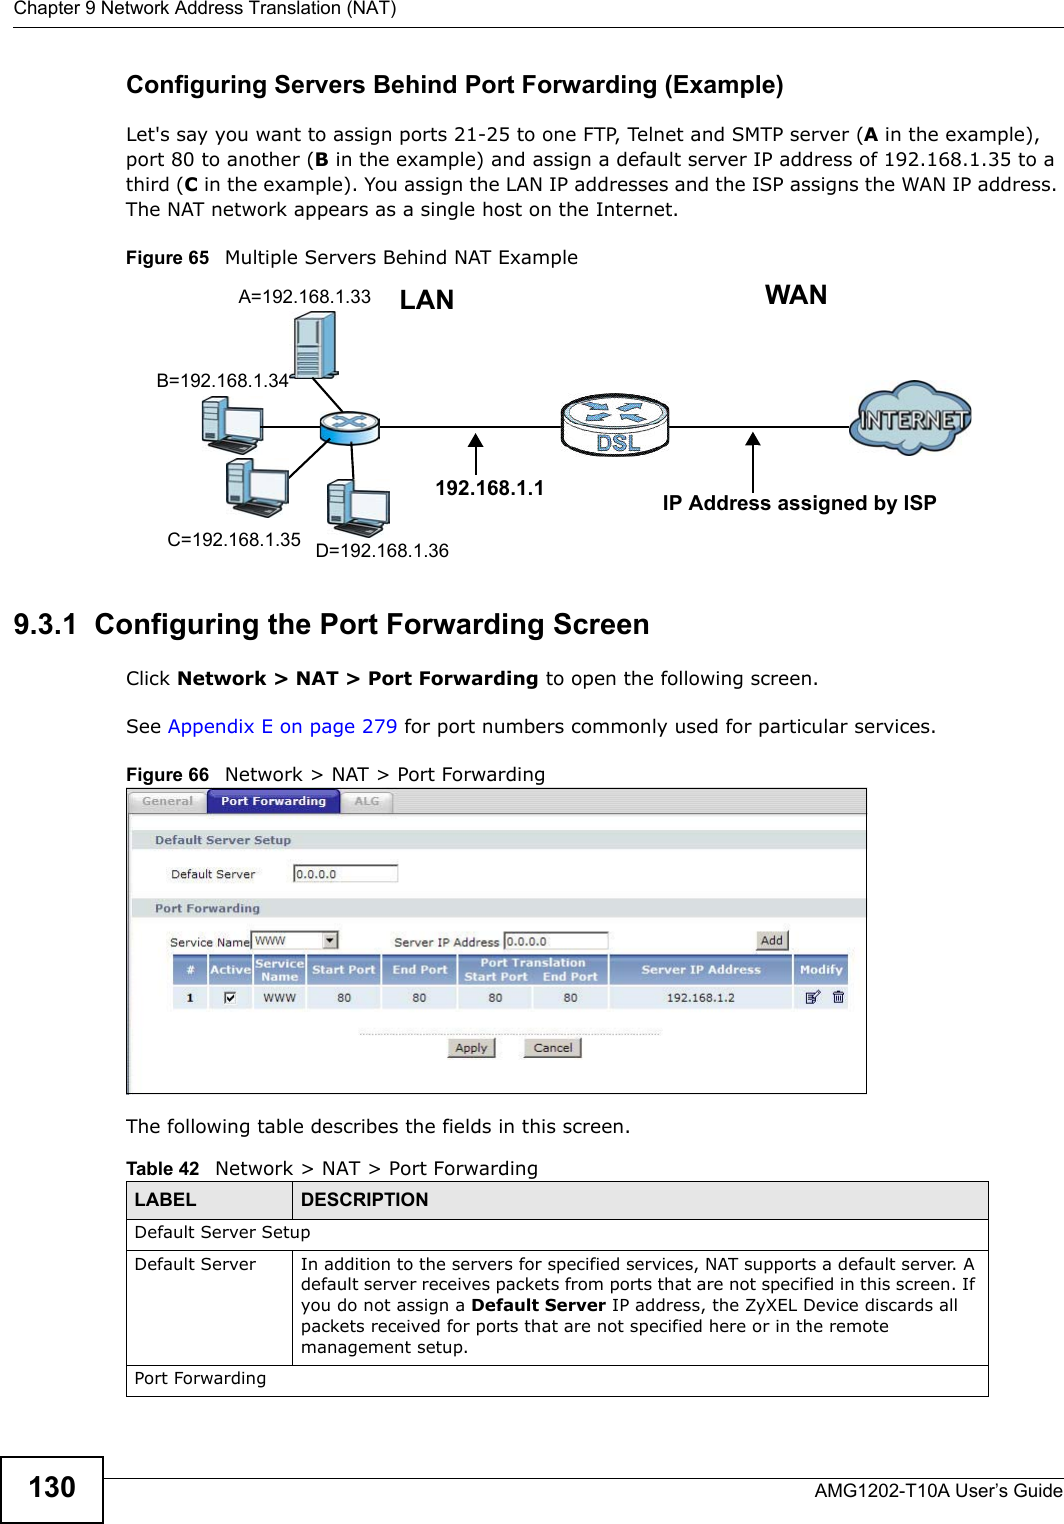 Chapter 9 Network Address Translation (NAT)AMG1202-T10A User’s Guide130Configuring Servers Behind Port Forwarding (Example)Let&apos;s say you want to assign ports 21-25 to one FTP, Telnet and SMTP server (A in the example), port 80 to another (B in the example) and assign a default server IP address of 192.168.1.35 to a third (C in the example). You assign the LAN IP addresses and the ISP assigns the WAN IP address. The NAT network appears as a single host on the Internet.Figure 65   Multiple Servers Behind NAT Example9.3.1  Configuring the Port Forwarding ScreenClick Network &gt; NAT &gt; Port Forwarding to open the following screen.See Appendix E on page 279 for port numbers commonly used for particular services. Figure 66   Network &gt; NAT &gt; Port ForwardingThe following table describes the fields in this screen.A=192.168.1.33D=192.168.1.36C=192.168.1.35B=192.168.1.34WANLAN192.168.1.1 IP Address assigned by ISPTable 42   Network &gt; NAT &gt; Port ForwardingLABEL DESCRIPTIONDefault Server SetupDefault Server In addition to the servers for specified services, NAT supports a default server. A default server receives packets from ports that are not specified in this screen. If you do not assign a Default Server IP address, the ZyXEL Device discards all packets received for ports that are not specified here or in the remote management setup.Port Forwarding